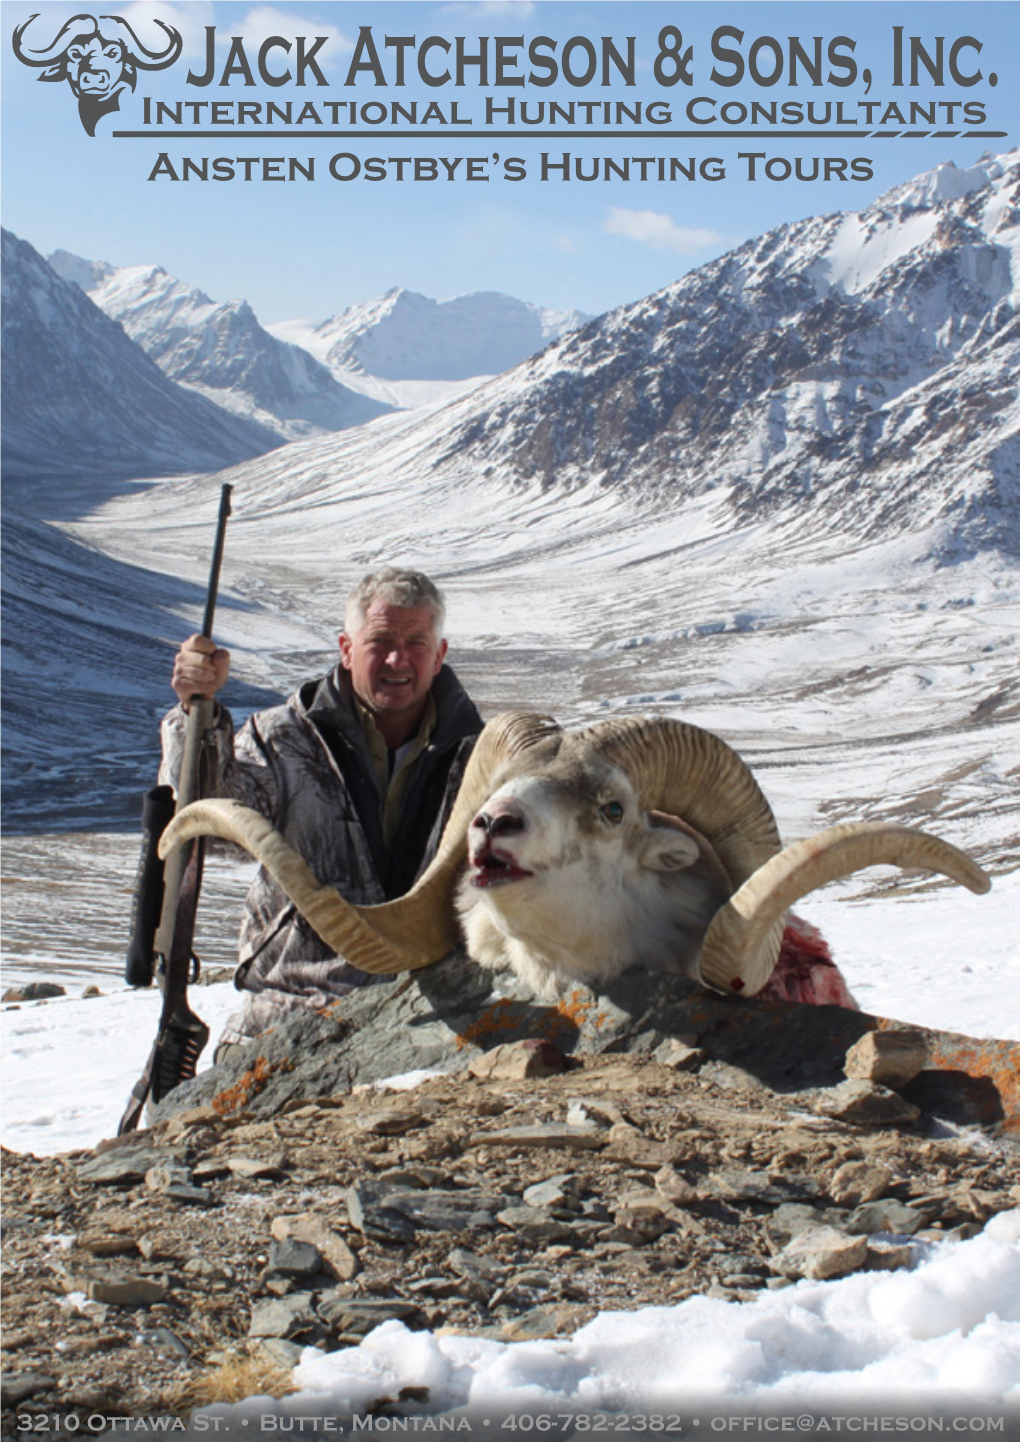 Ansten Ostbye's Hunting Tours